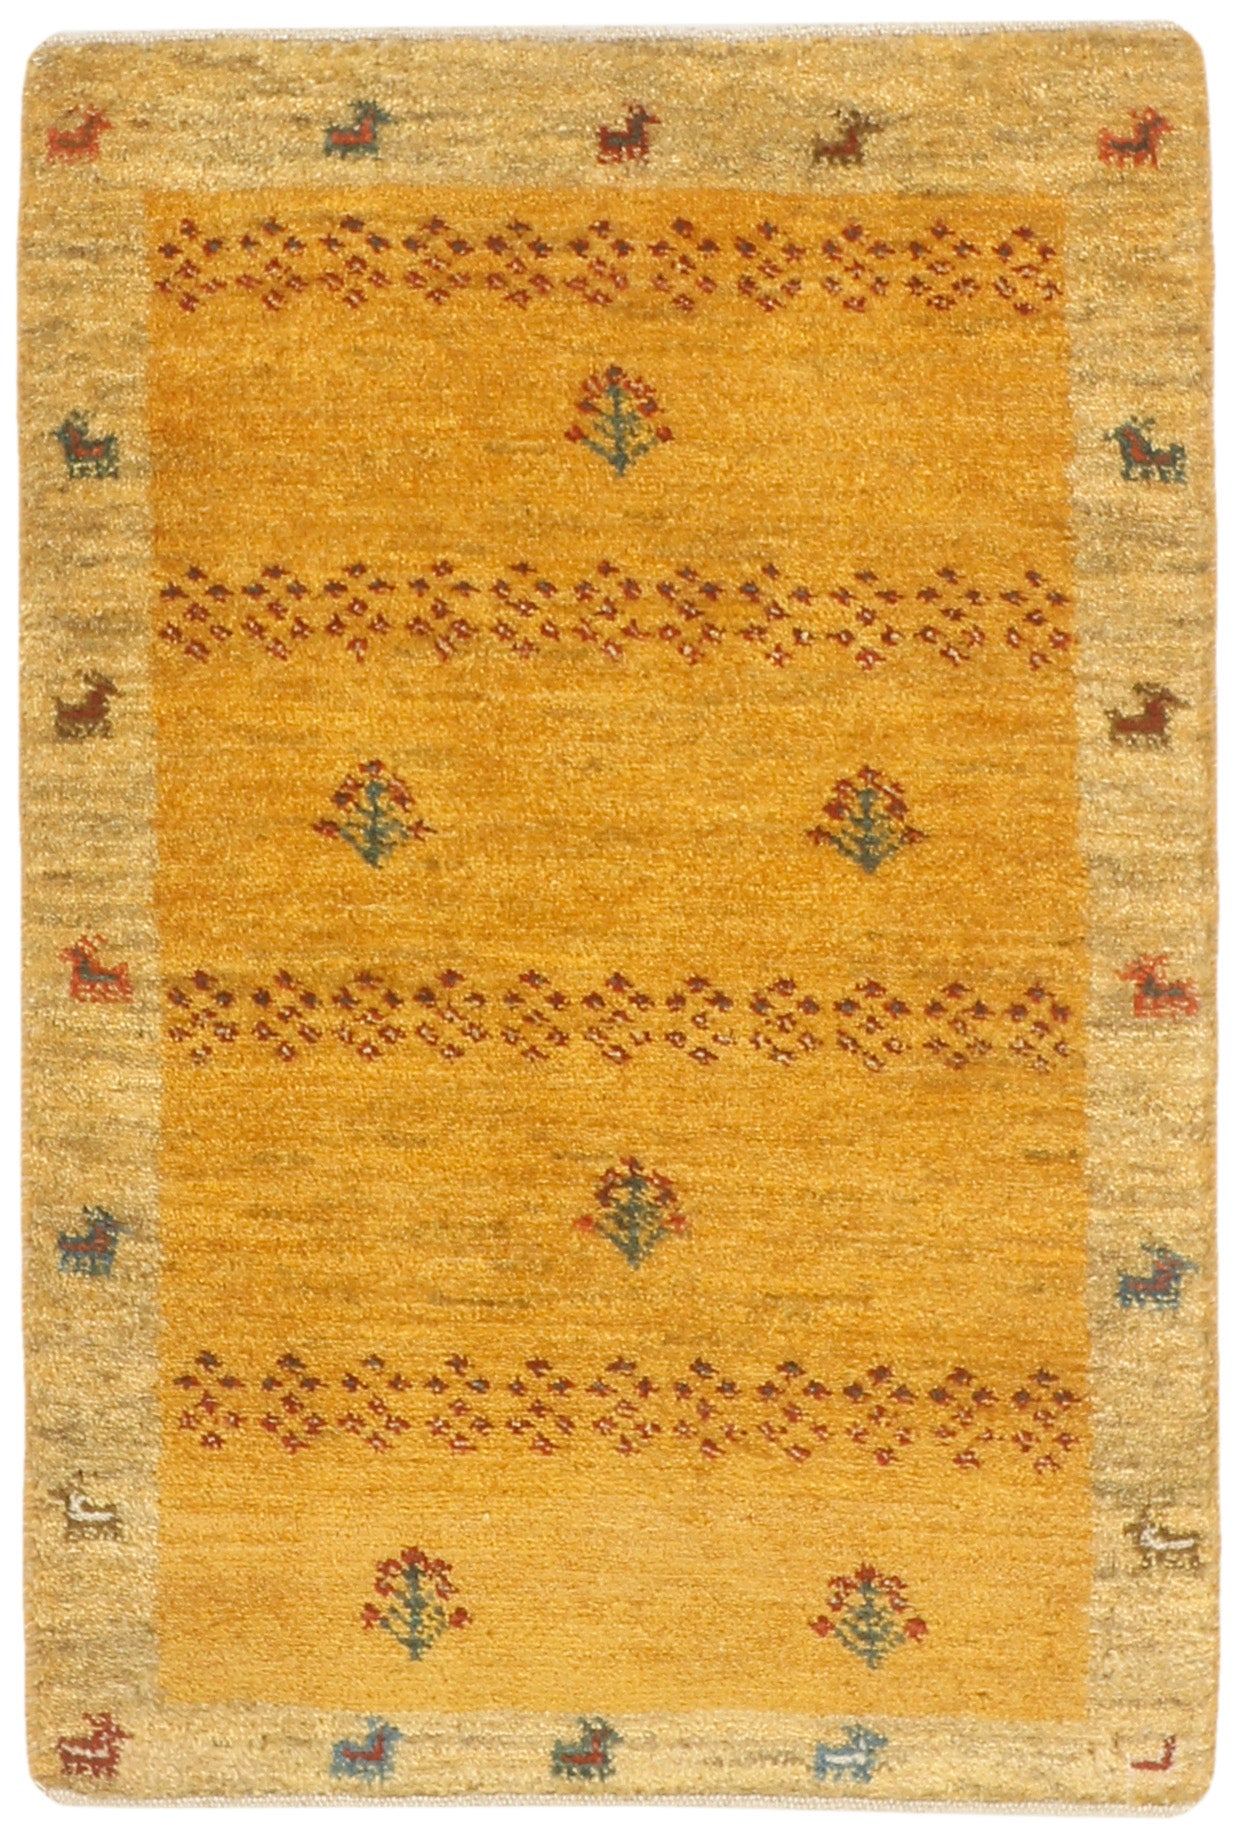 Authentic Persian wool rug with geometric design in beige